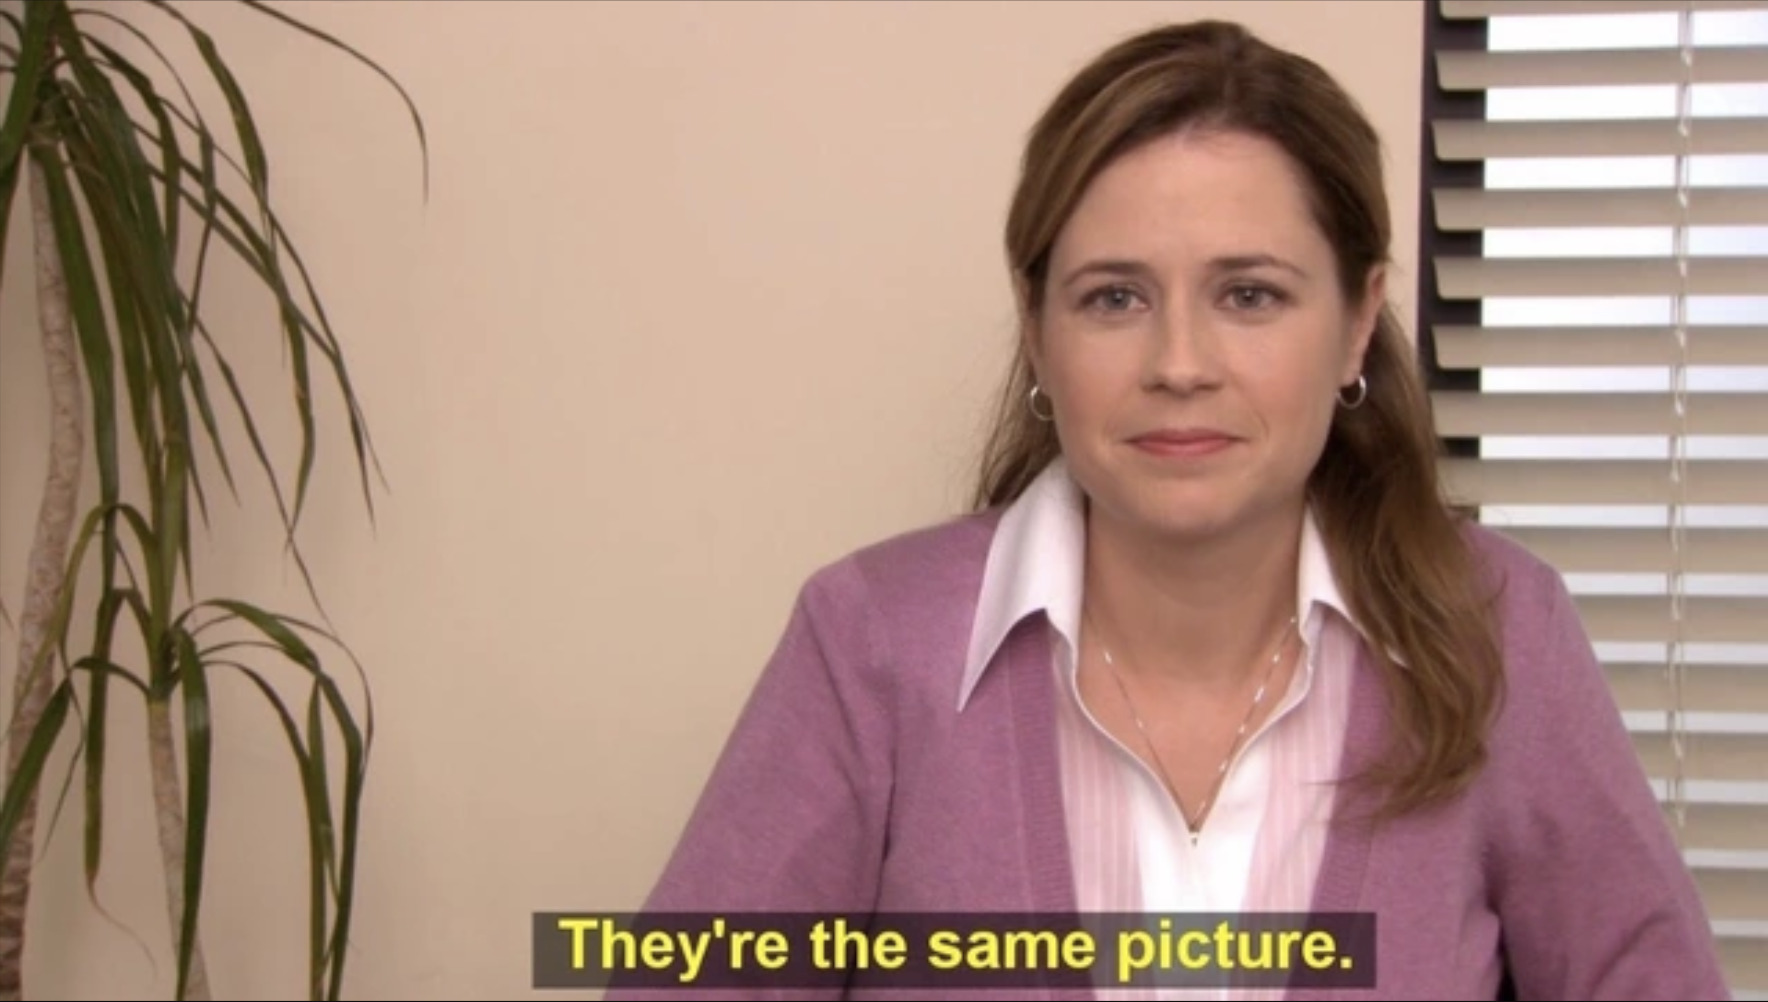 theyre-the-same-picture-pam-the-office-meme-6091b4759bf44-png.jpg